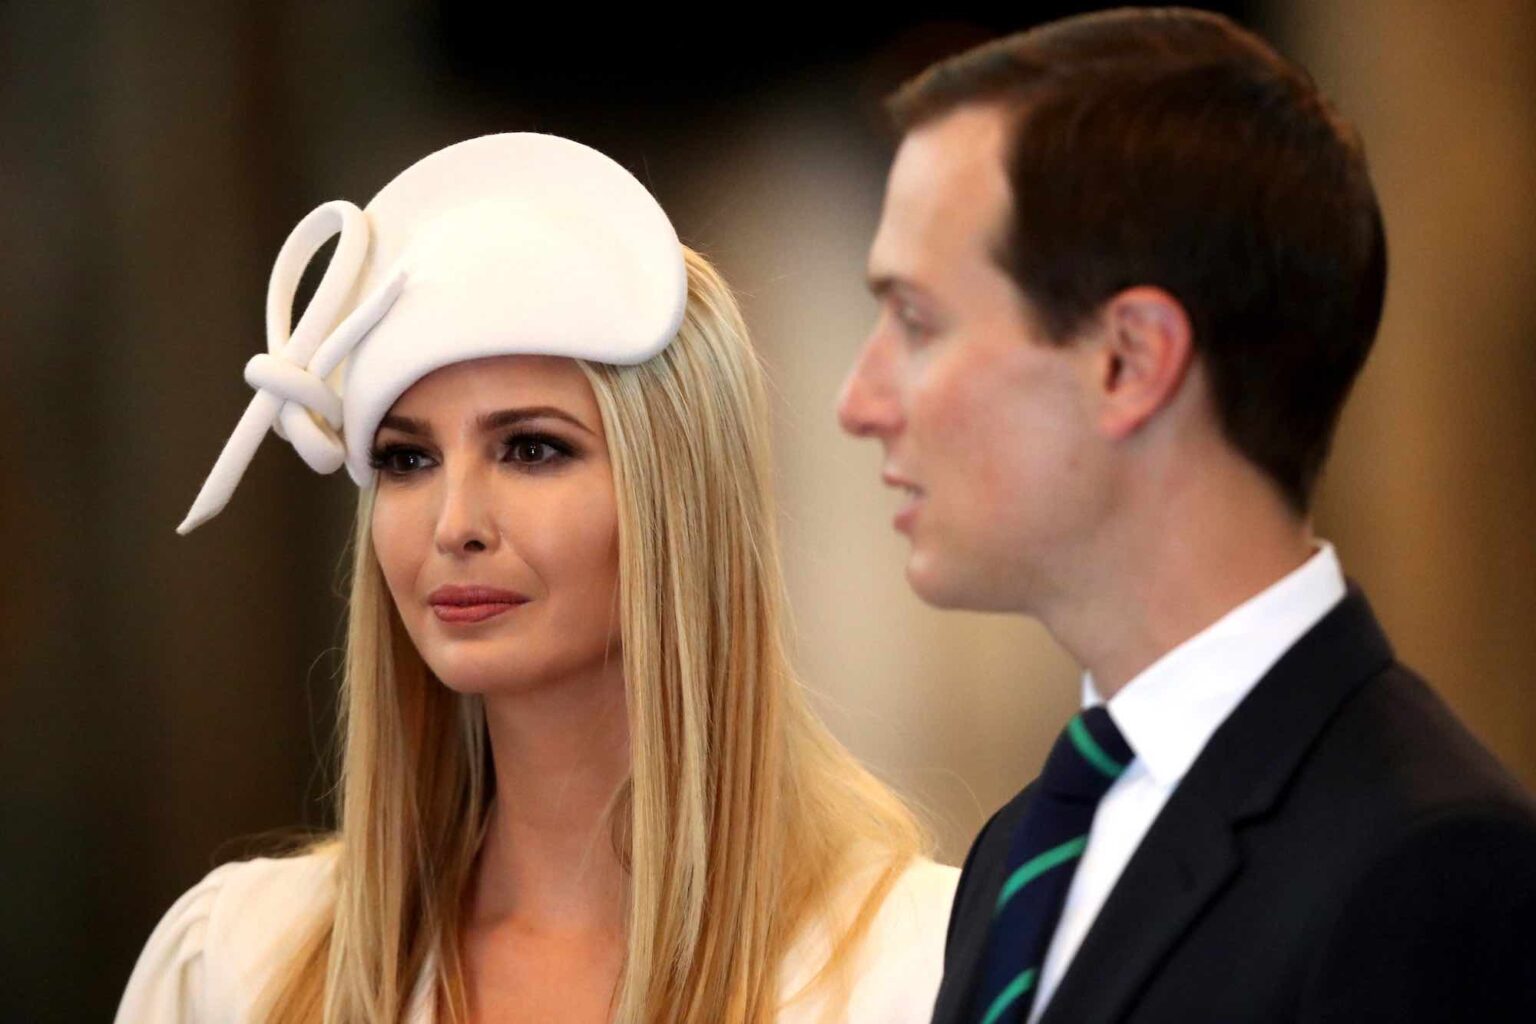 Did Twitter just diss Ivanka Trump? Twitter users are not happy with Donald Trump's daughter, and we have the best memes to prove it. Check them out!